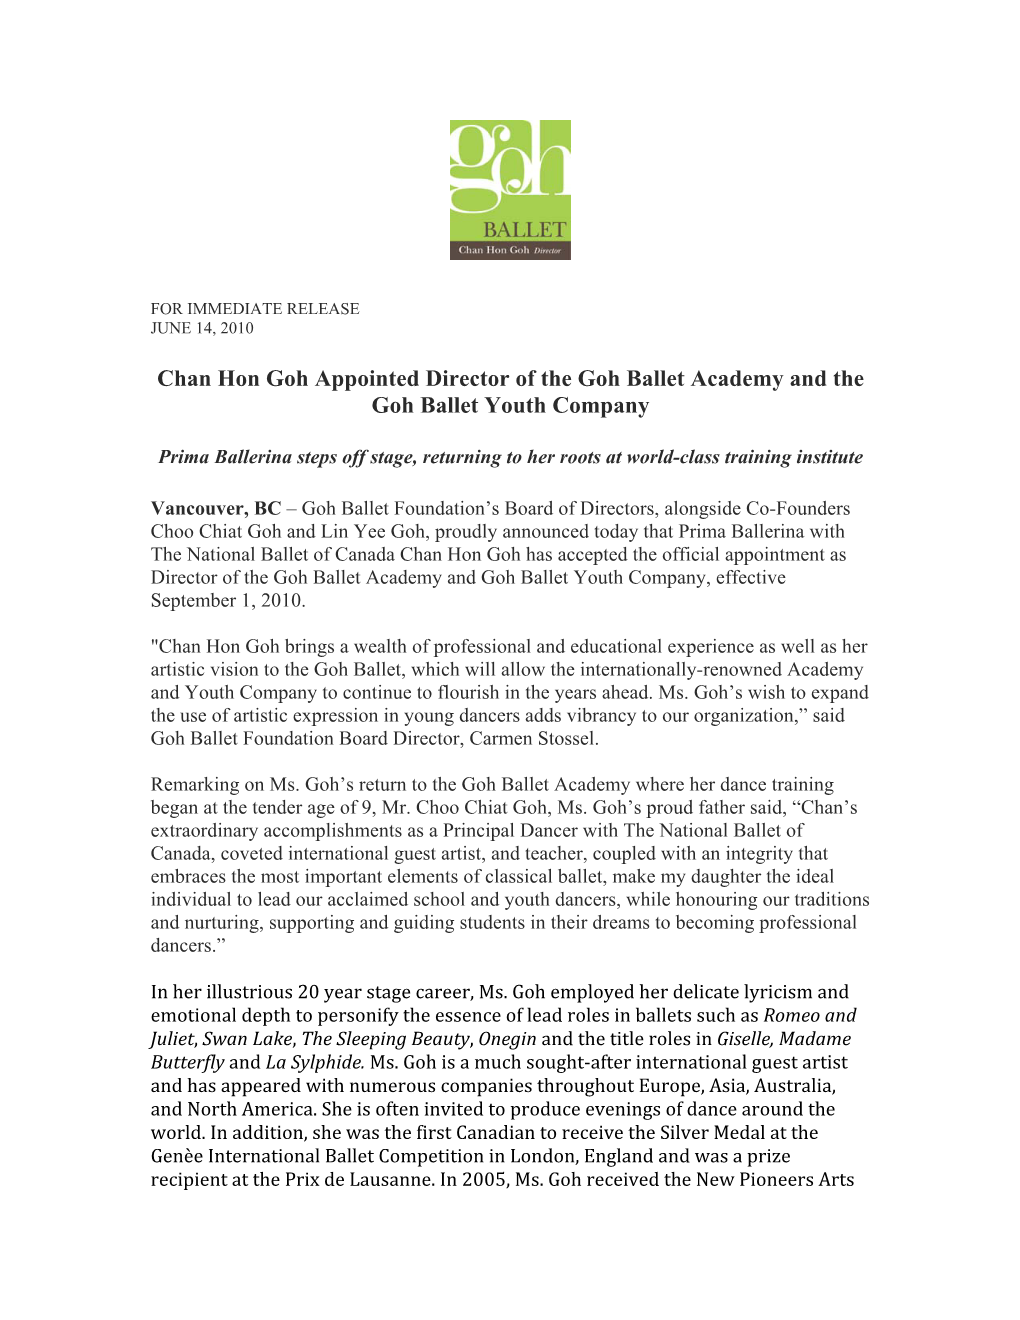 2010-06-14-Press Release-Chan Hon Goh Appointed Director of Goh Ballet